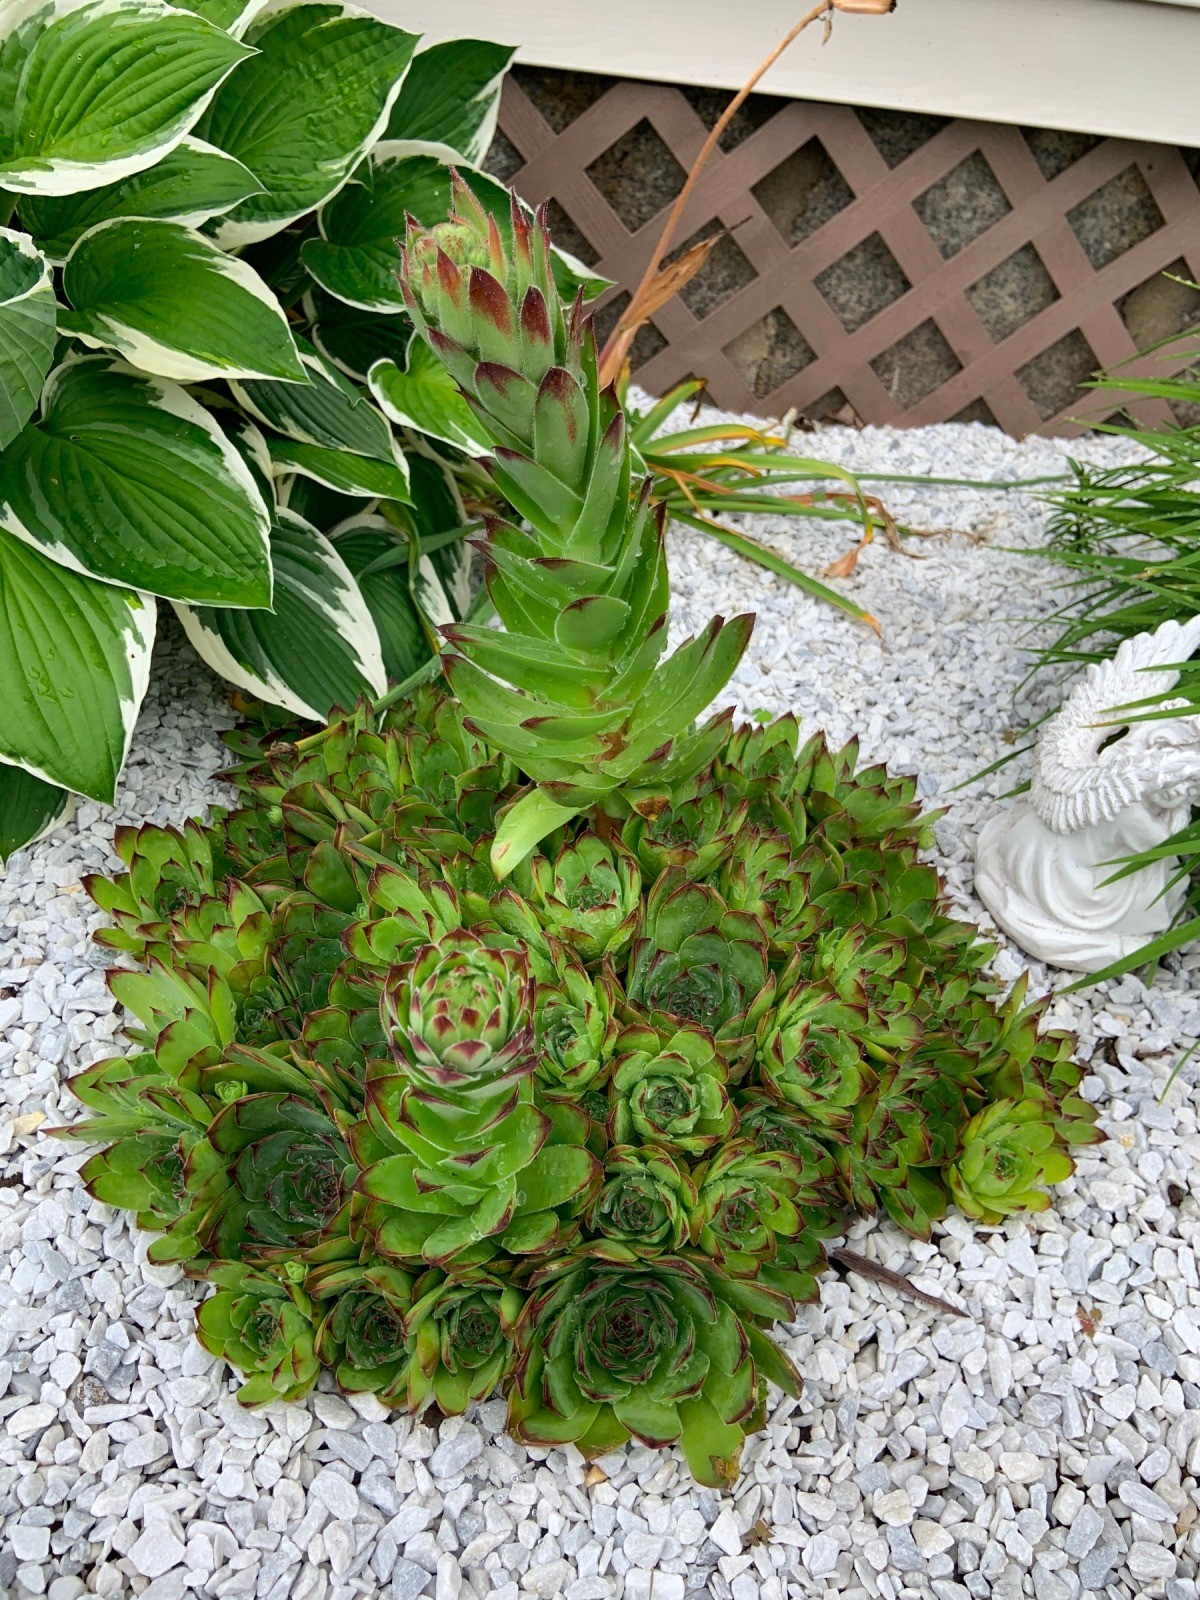 Why are My Hens And Chicks Growing Tall? 